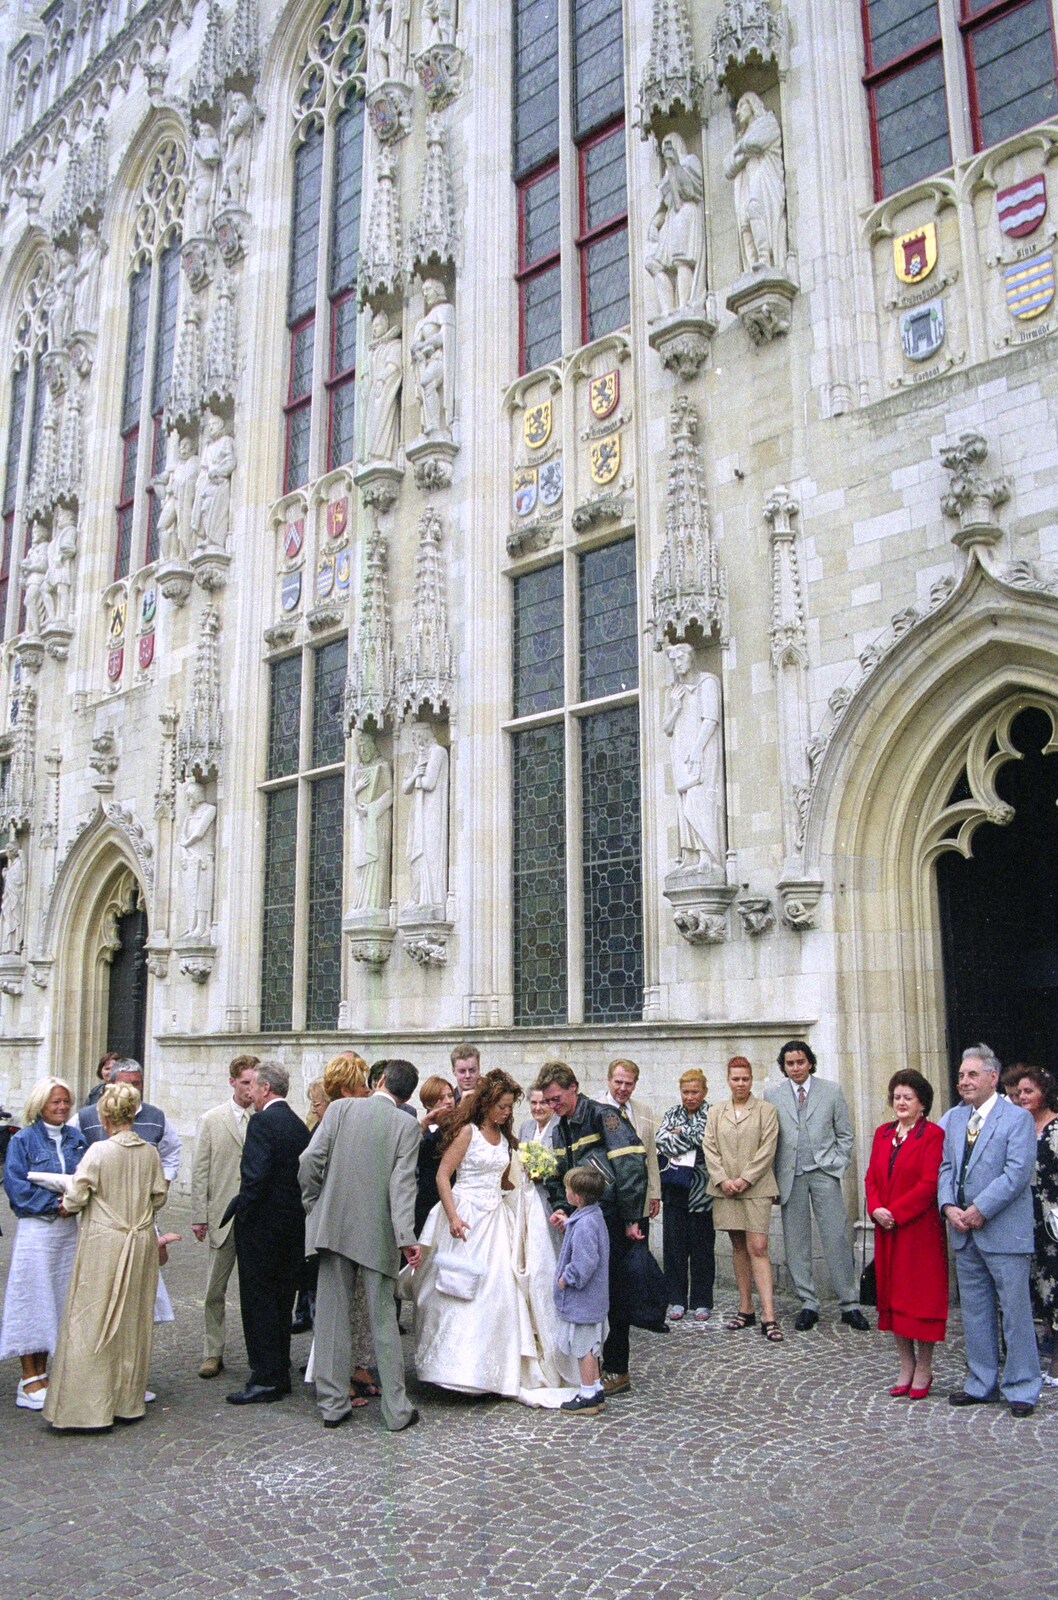 More Bruges wedding action from CISU: An SCC Day-Trip to Bruges, Belgium - 26th May 2000